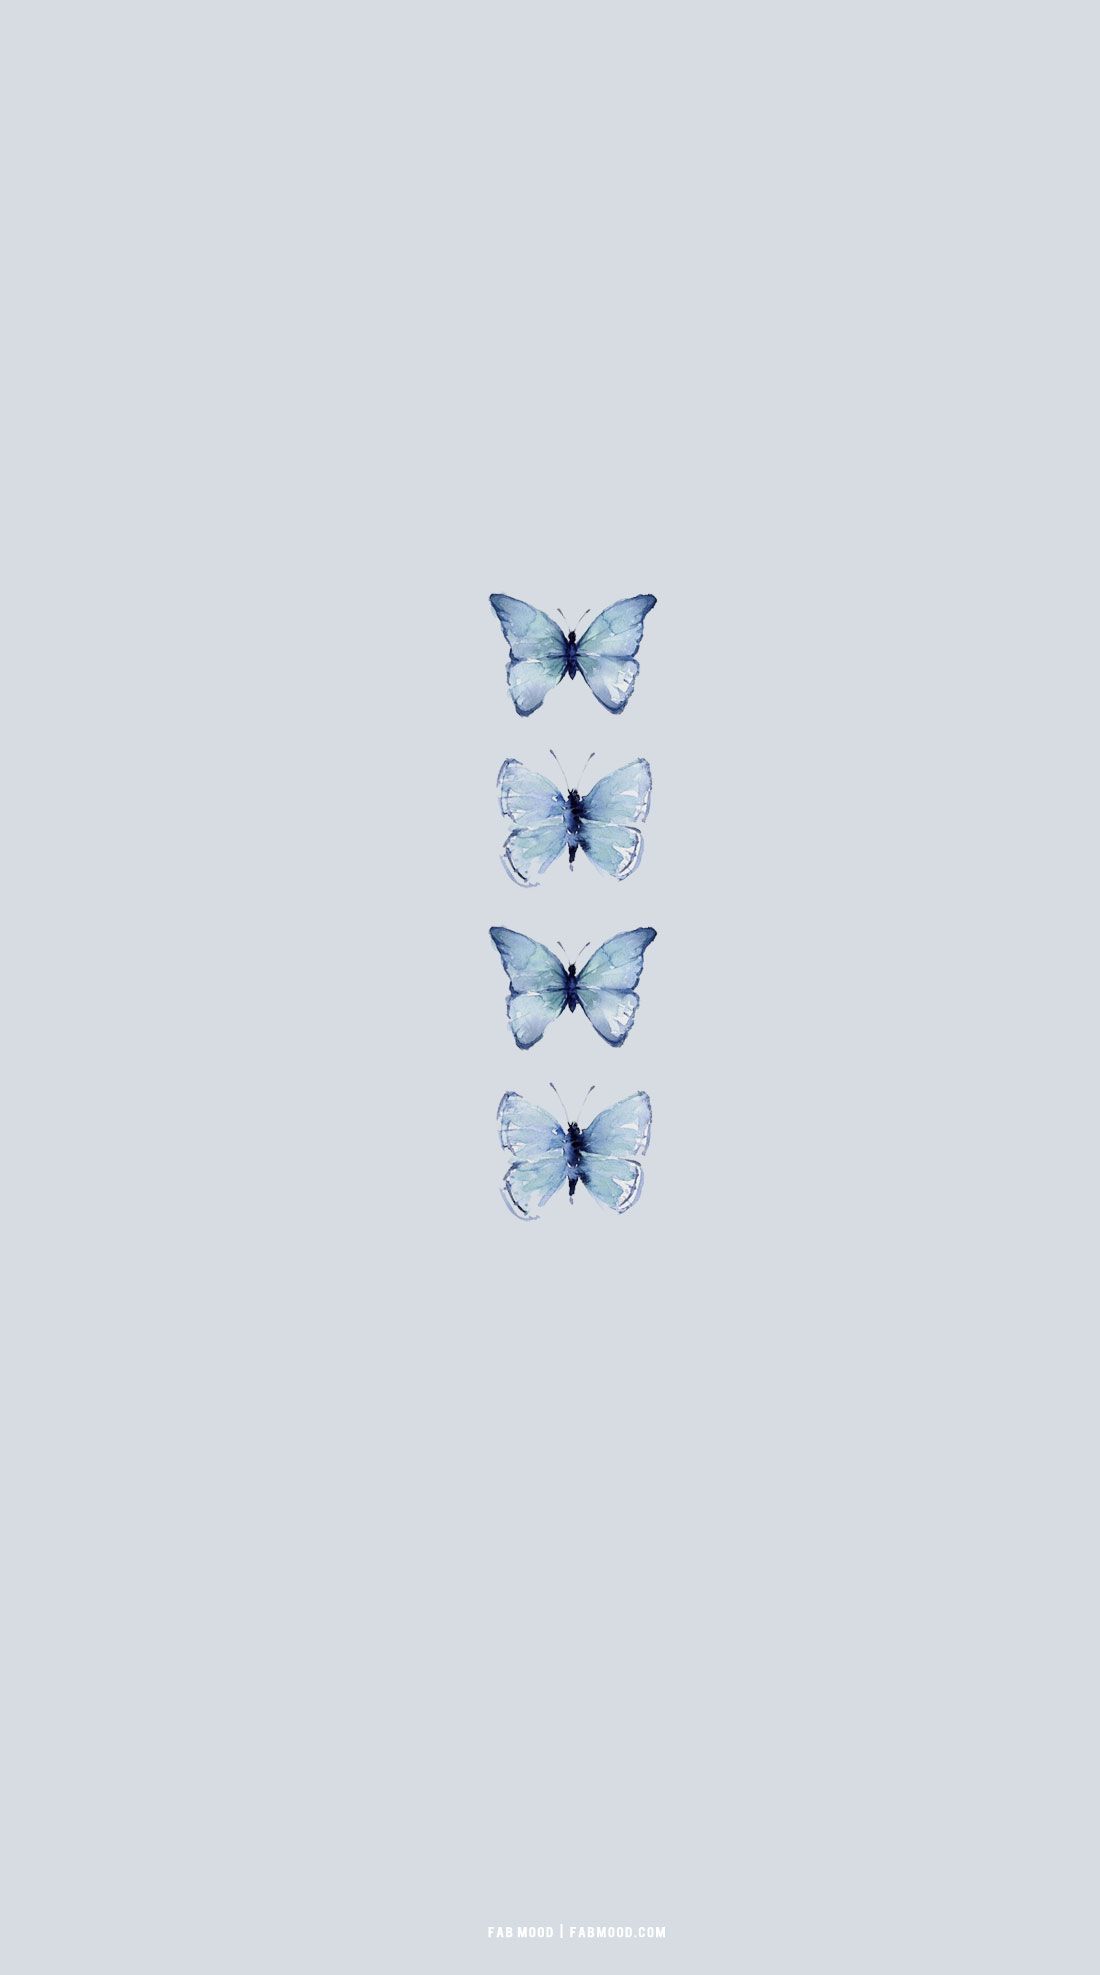 Blue Wallpaper Designs for Phone : Blue Butterfly Blue Background